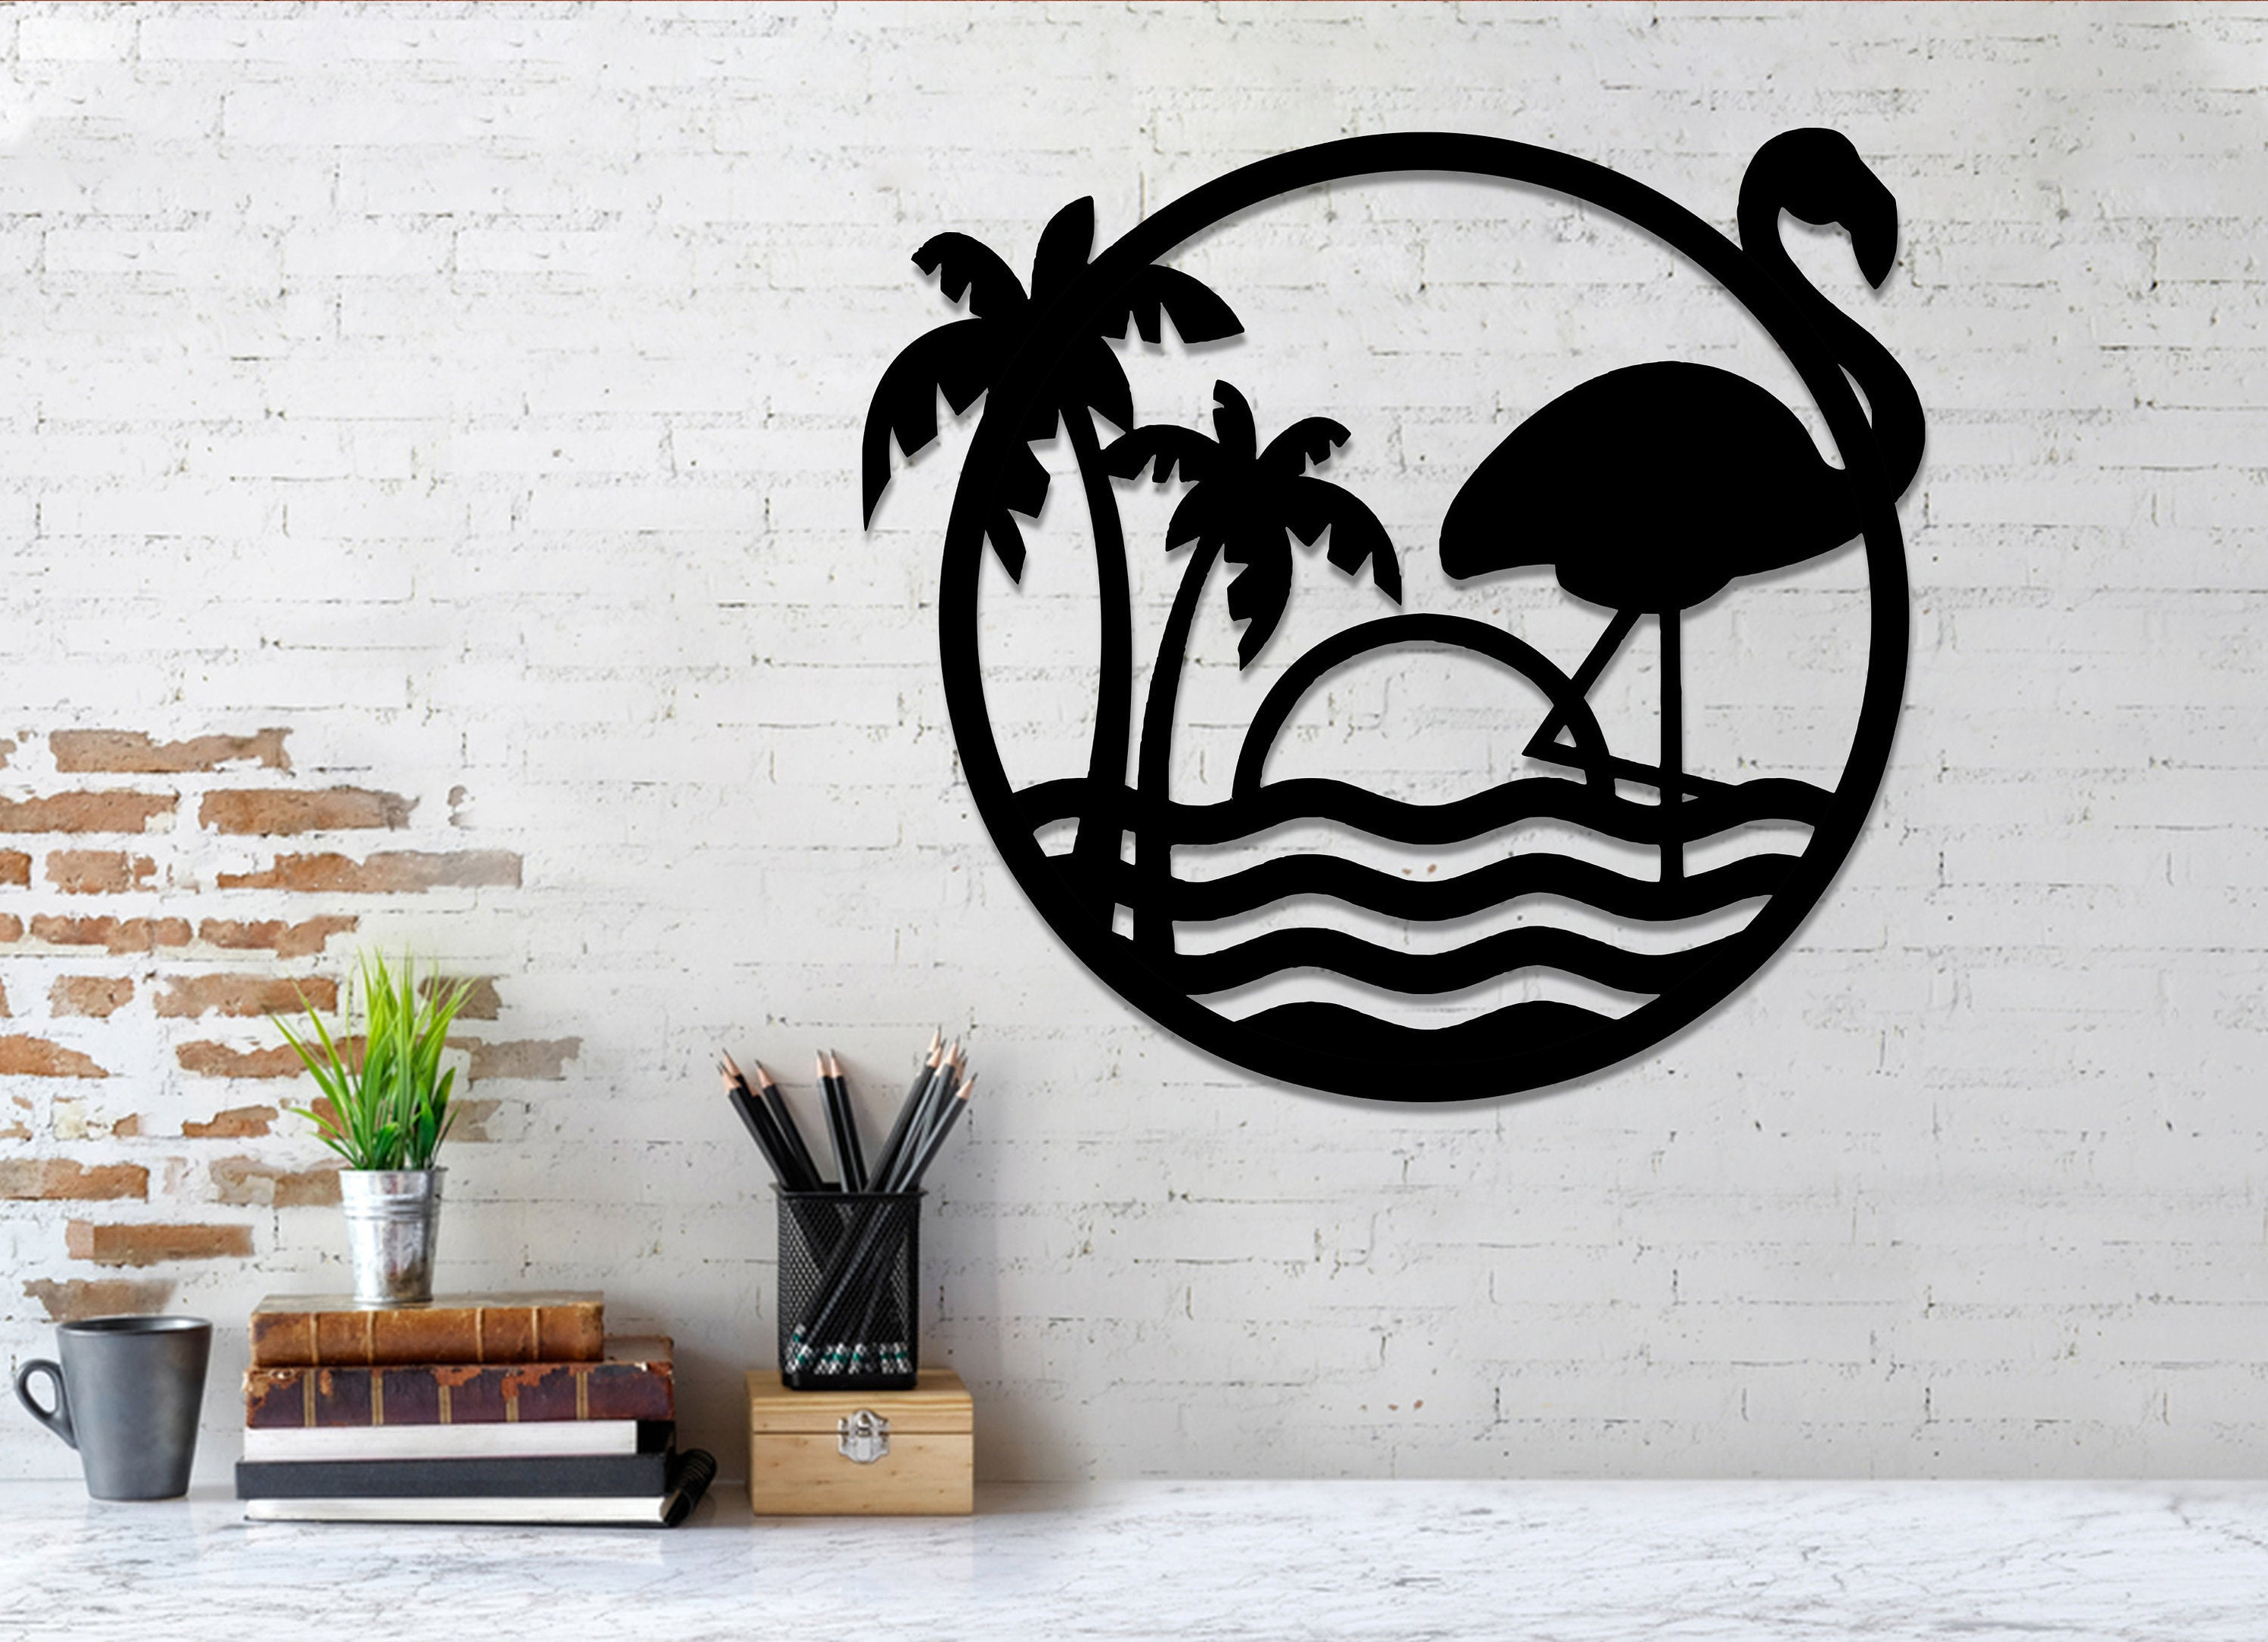 Personalized Flamingo Metal Sign, Beach House Metal Sign, Monogram Flamingo, Handcrafted Metal Art, Metal Yard Art, House Decor, Best Gift, Laser Cut Metal Signs Custom Gift Ideas 12x12IN